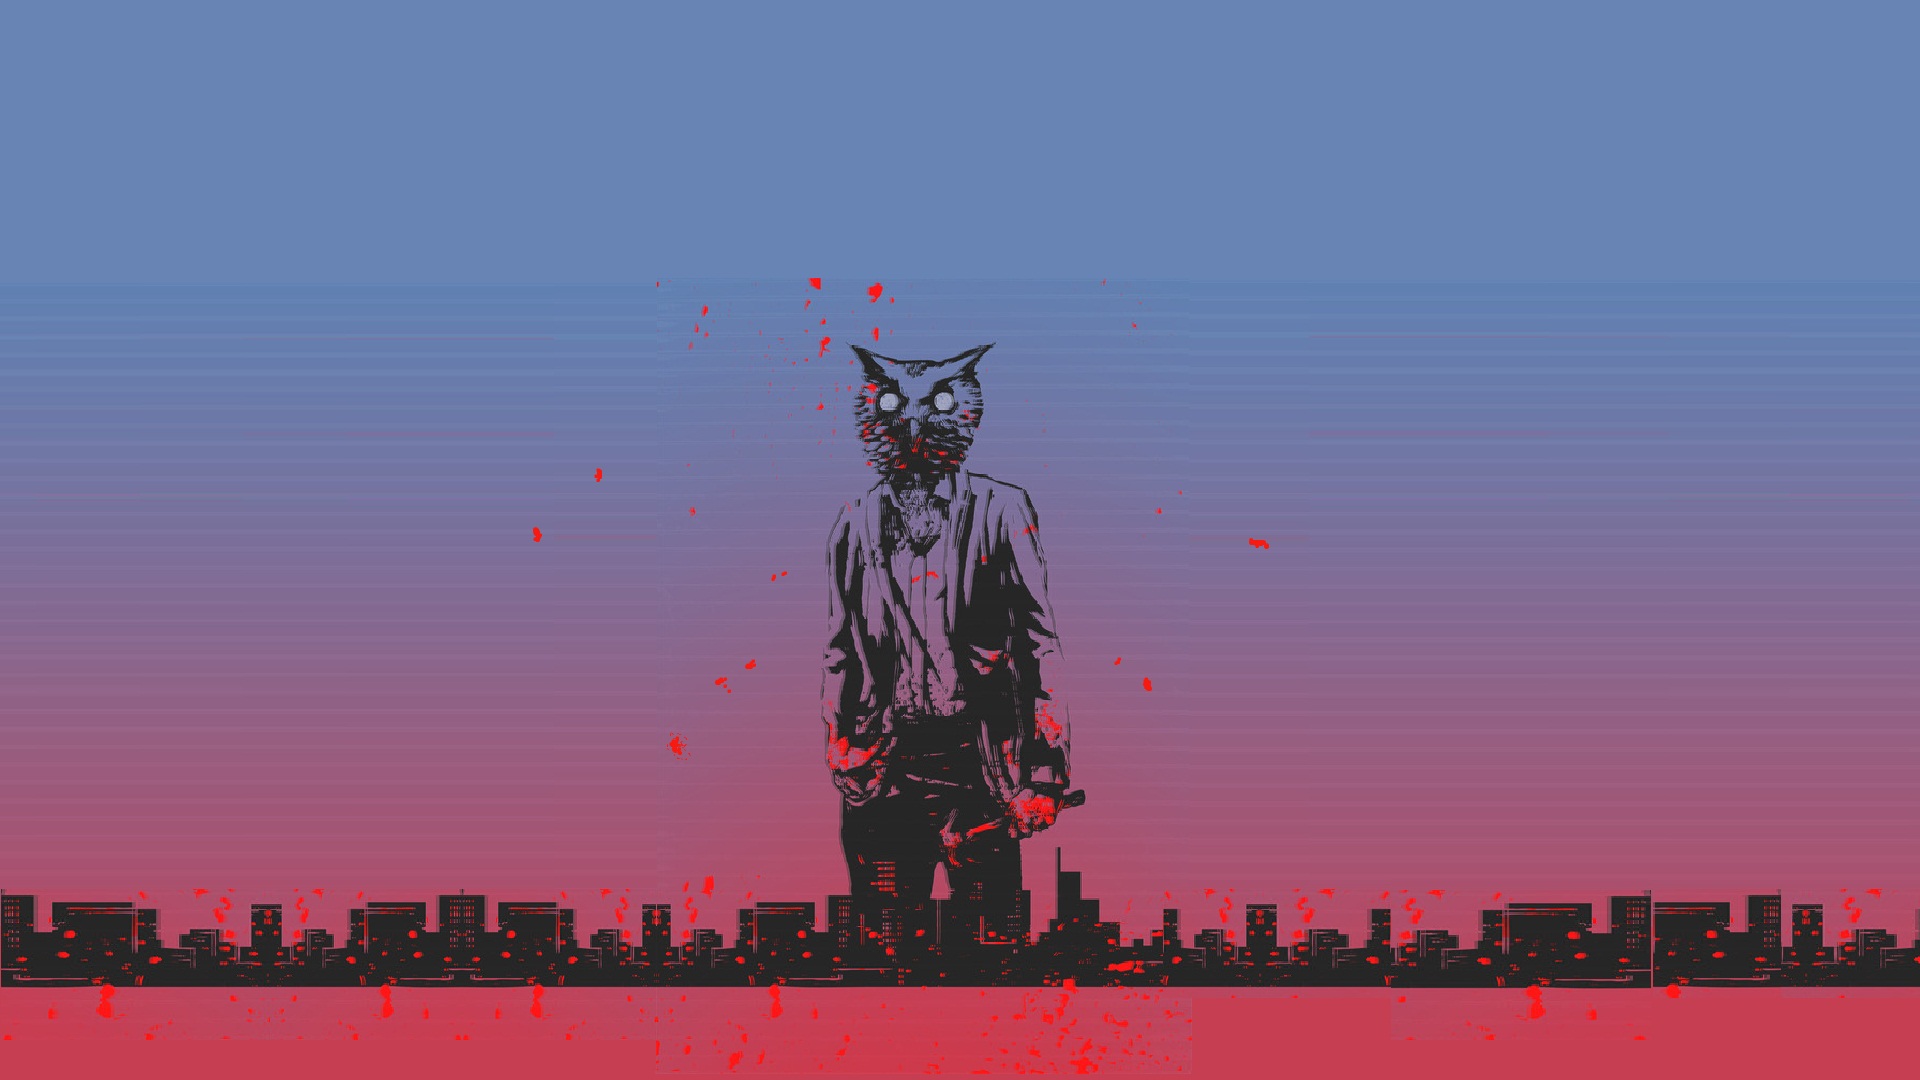 hotline miami, video game, hotline miami 2: wrong number